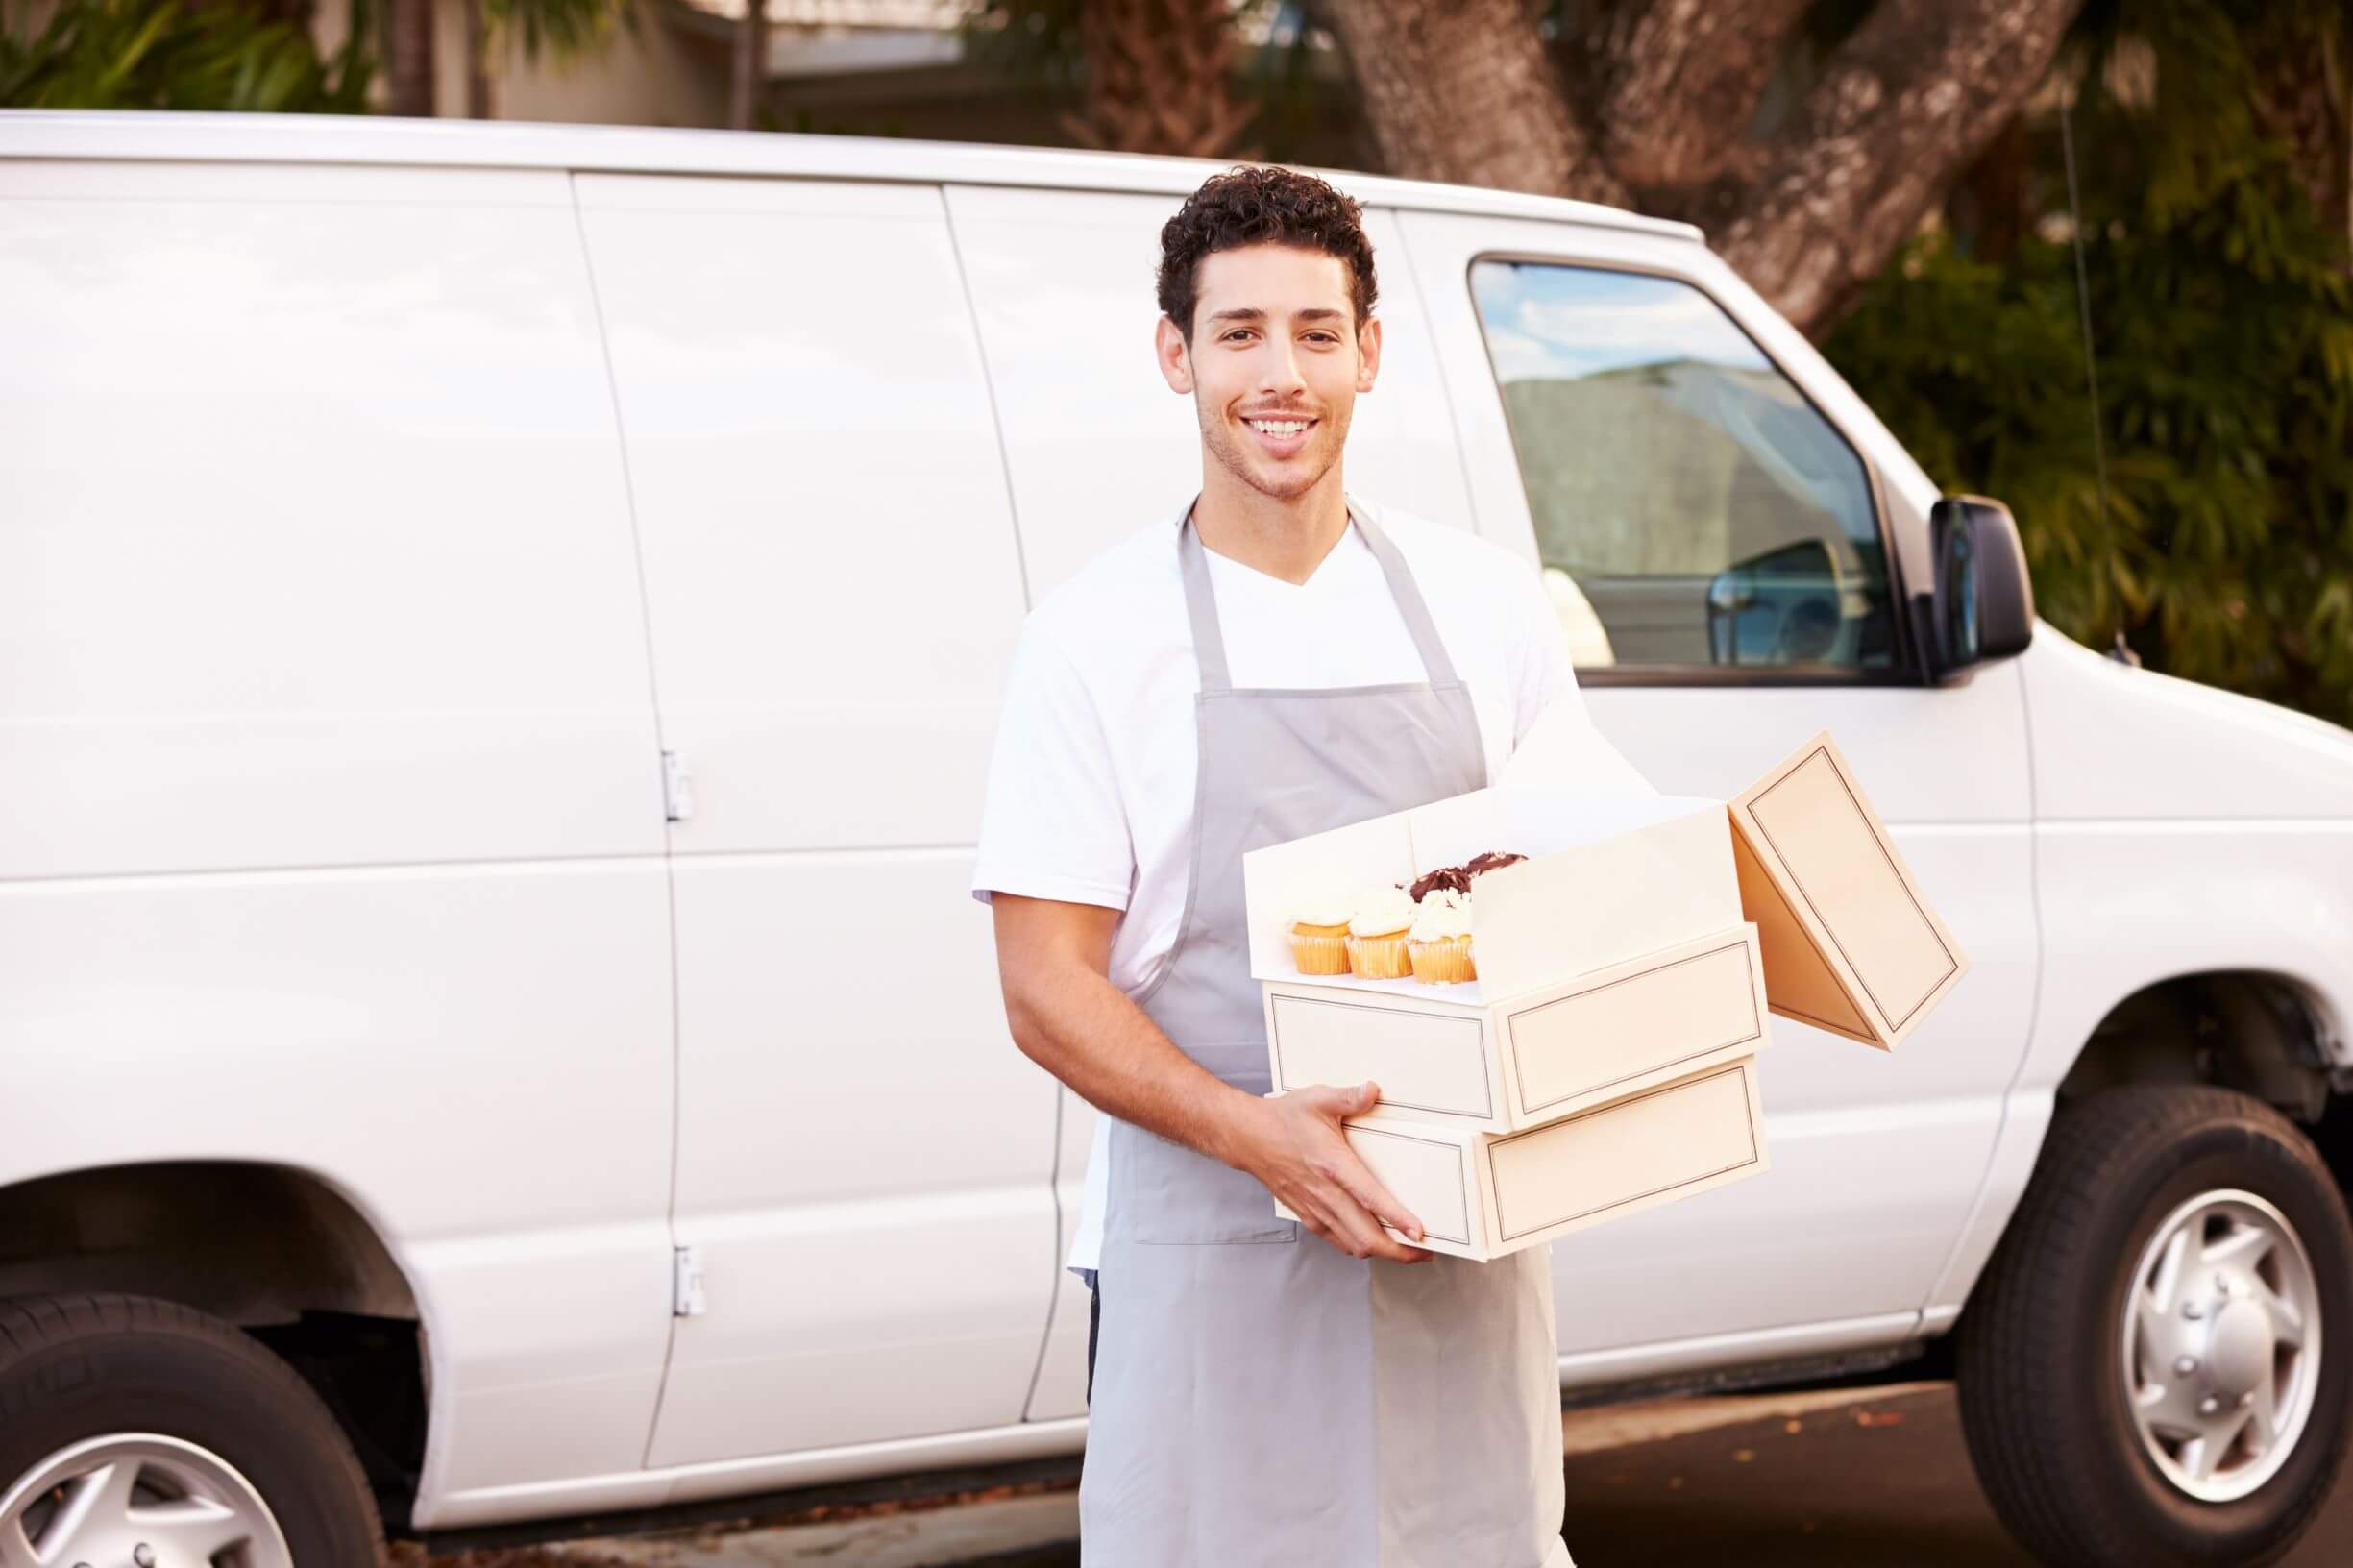 If you have a catering van, it's important to make sure you have the right insurance.